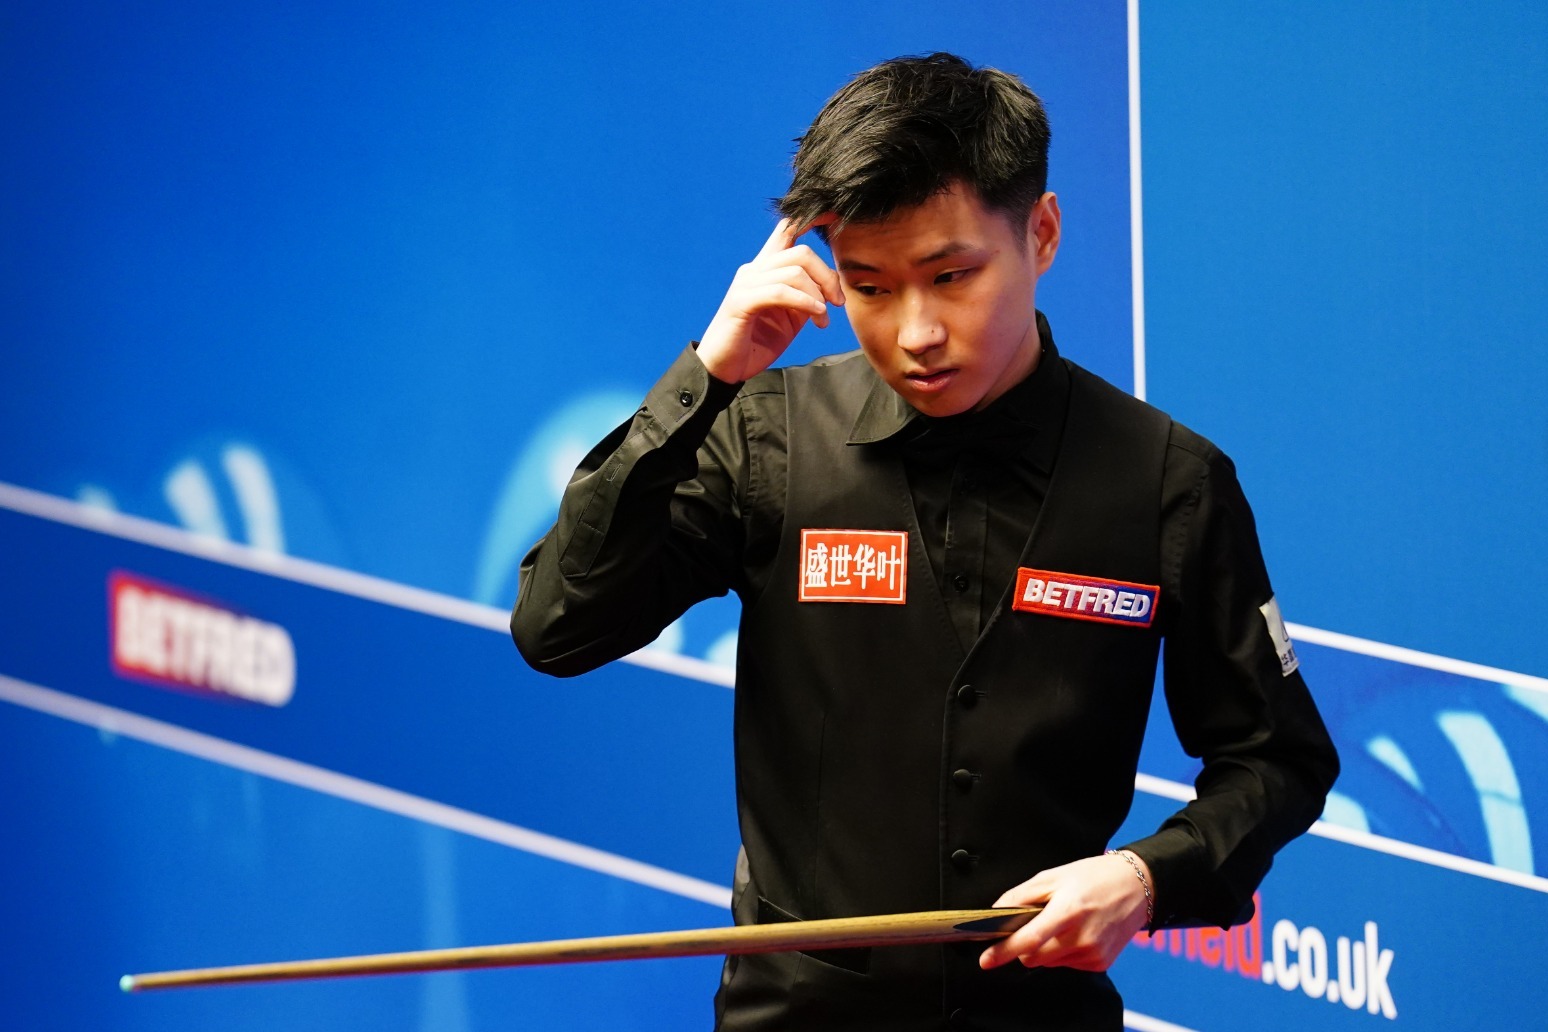 Zhao Xintong and Zhang Jiankang latest players suspended from World Snooker Tour 